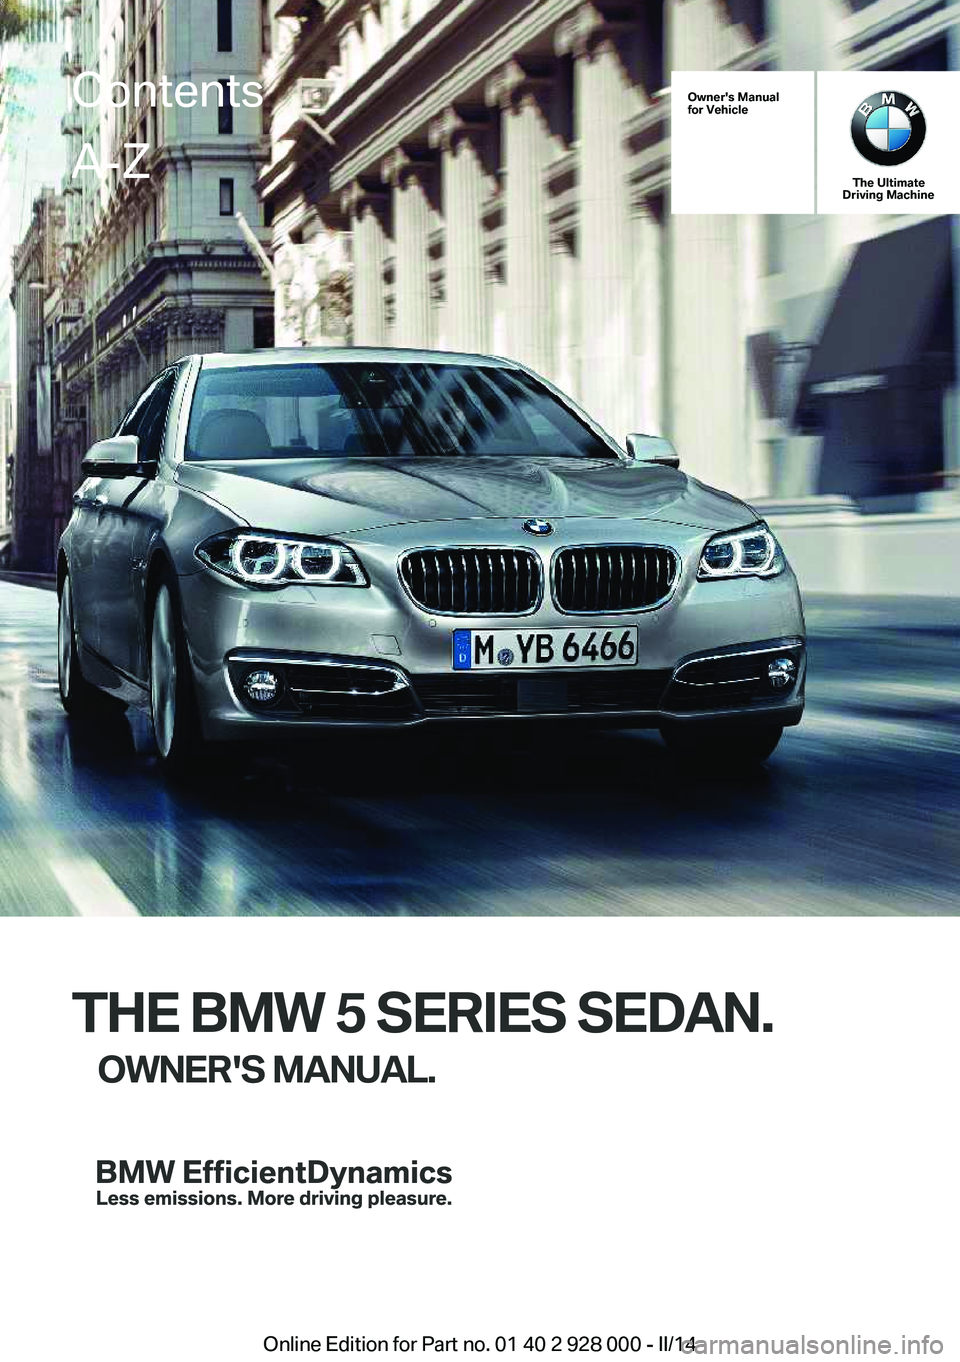 BMW 535D 2014  Owners Manual Owner's Manual
for Vehicle
The Ultimate
Driving Machine
THE BMW 5 SERIES SEDAN.
OWNER'S MANUAL.
ContentsA-Z
Online Edition for Part no. 01 40 2 928 000 - II/14   